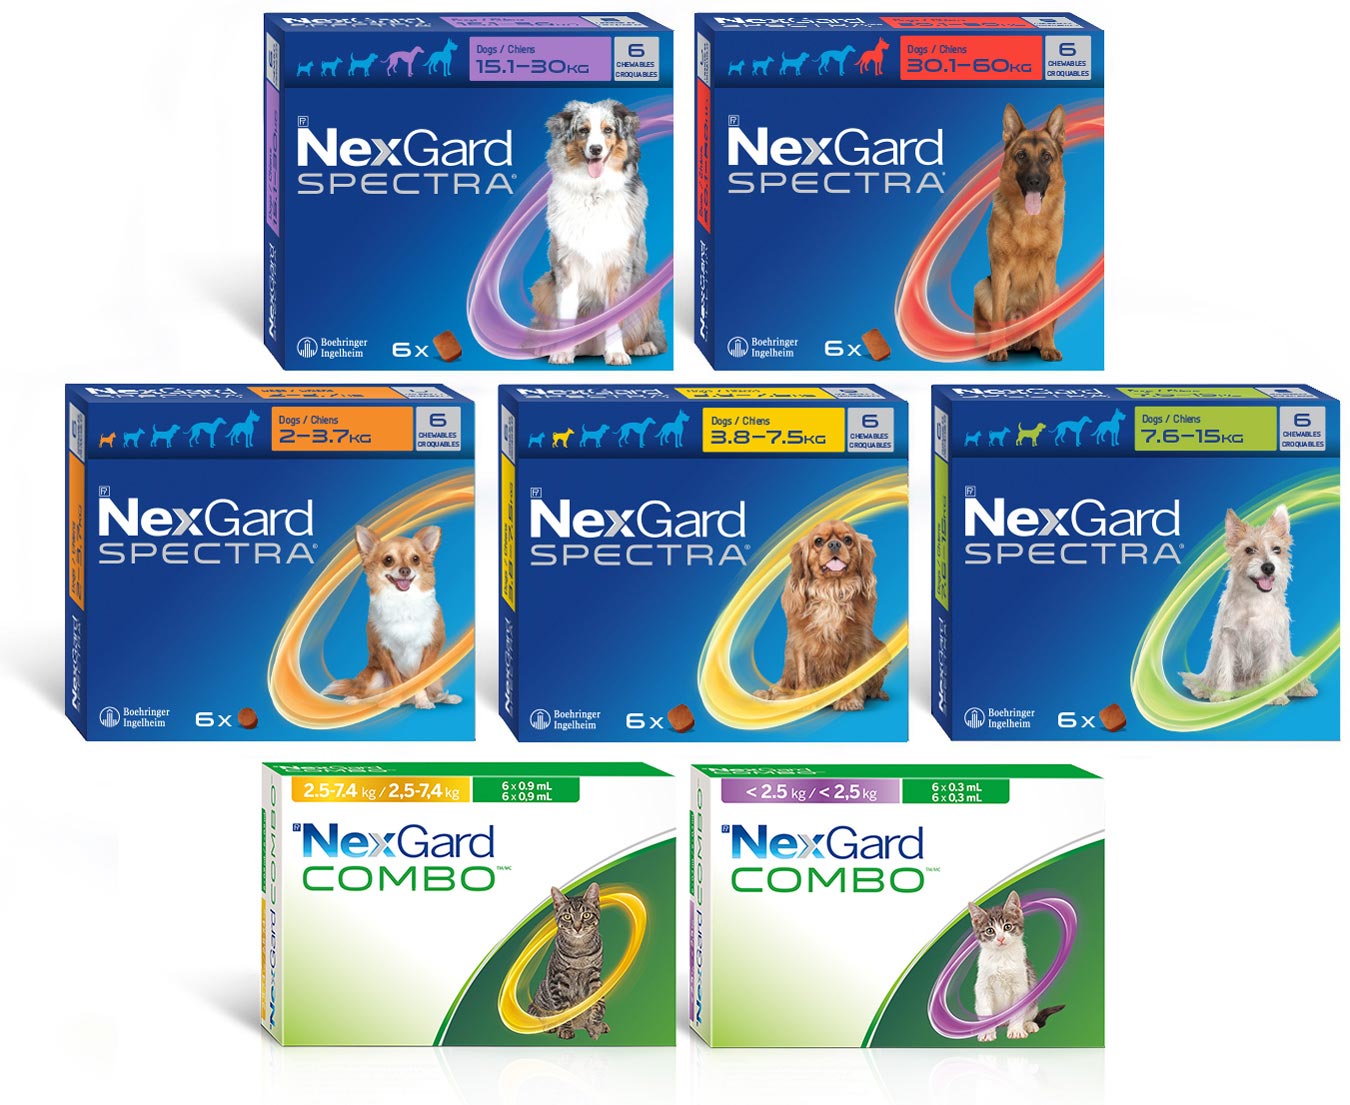 Image. Seven front-facing product boxes. First row: NexGard Spectra for dogs 15.1-30kg, NexGard Spectra for dogs 30.1-60kg; Second row: NexGard Spectra for dogs 2-3.5kg, NexGard Spectra for dogs 3.6-7.5kg, NexGard Spectra for dogs 7.6-15kg; Third row: NexGard Combo for cats 2.5-7.4, NexGard Combo for cats <2.5kg.